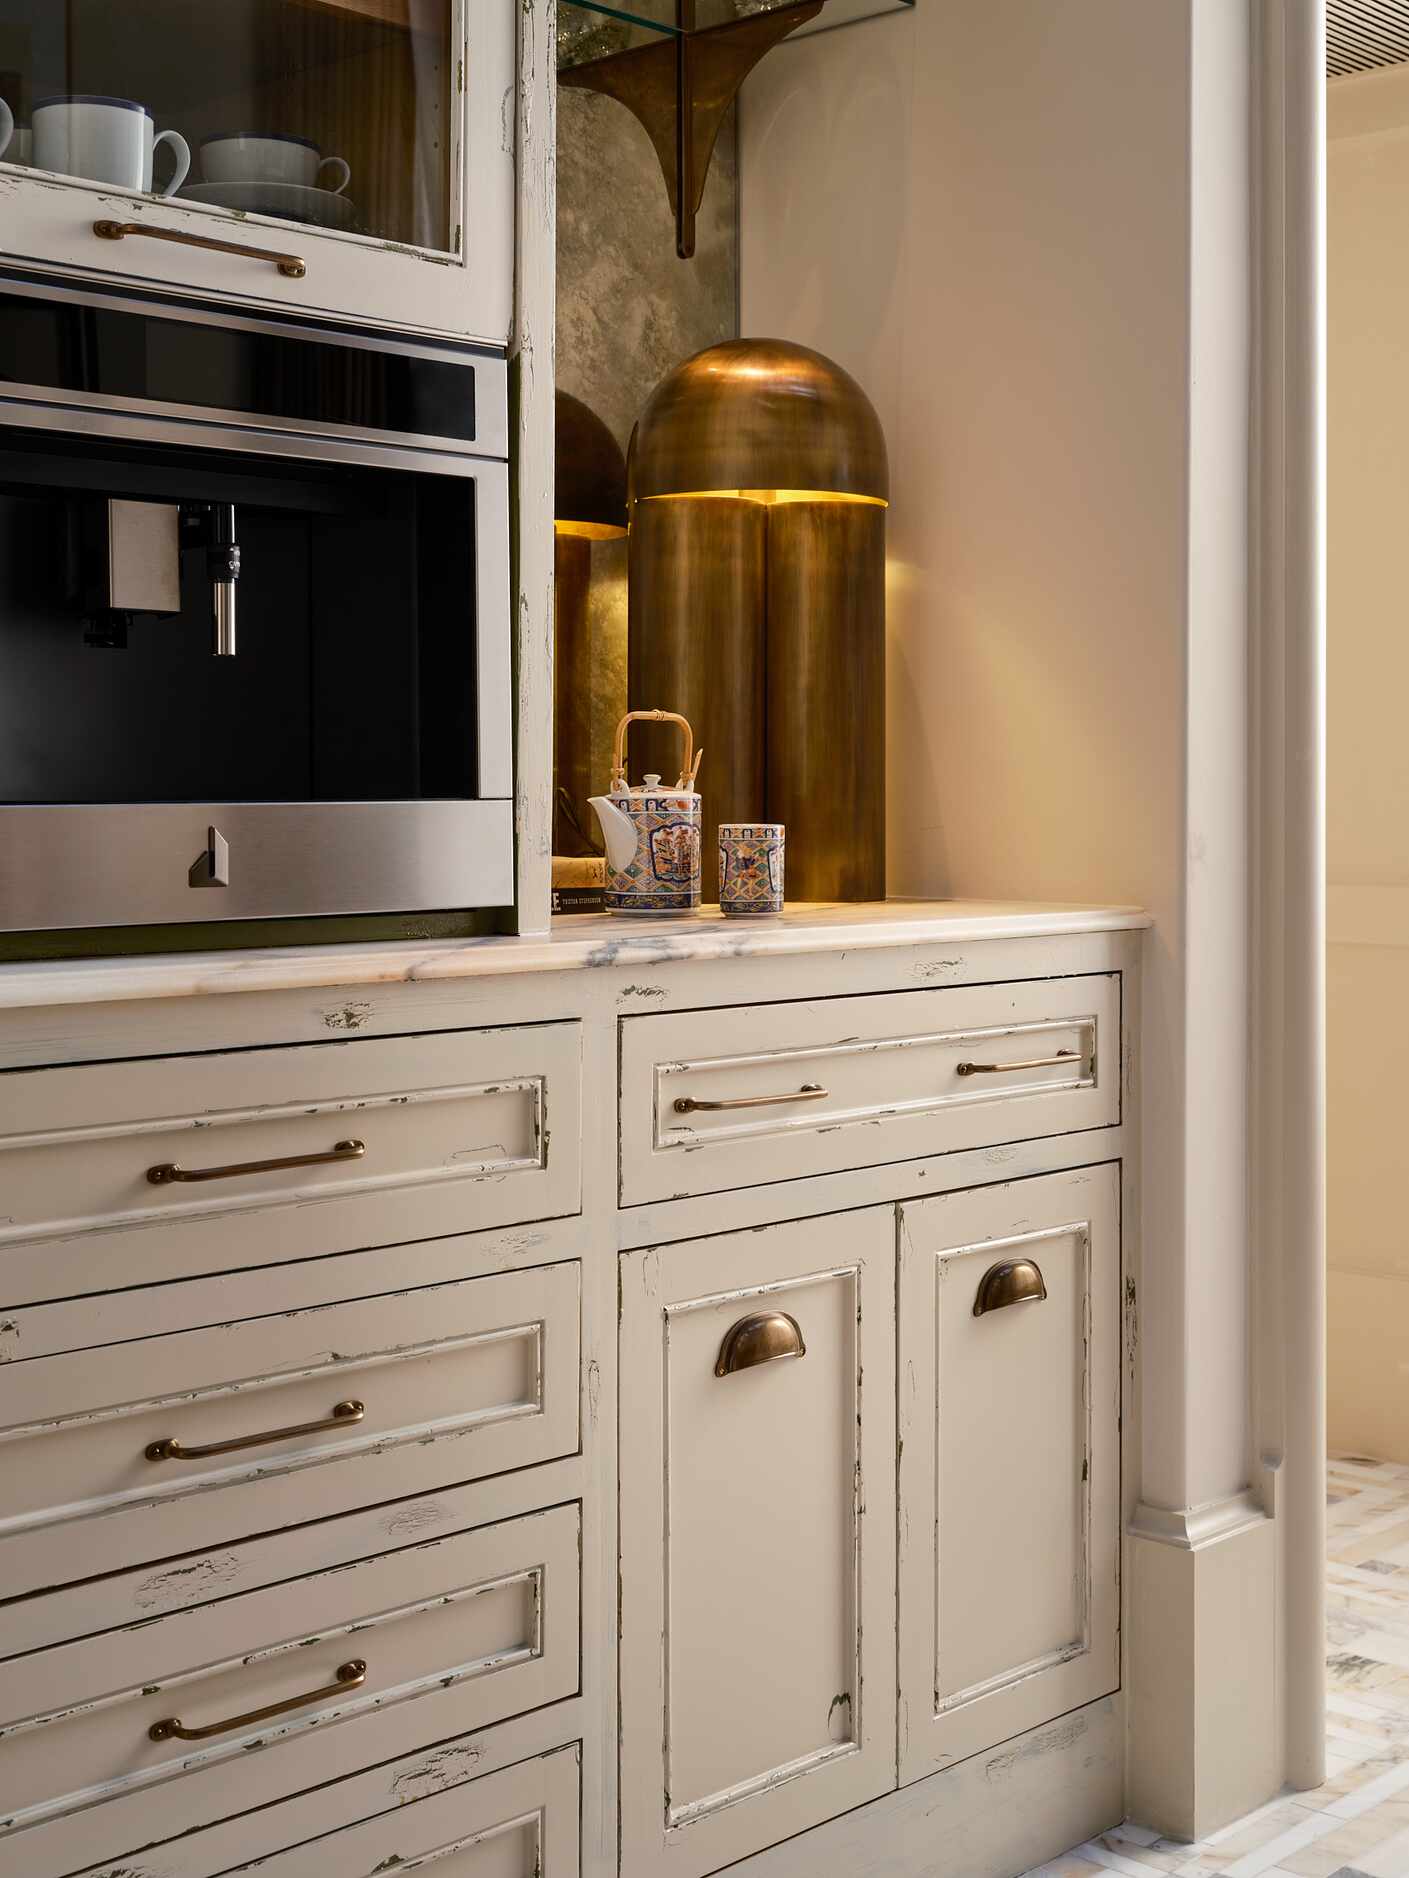 Pictured is a designated coffee bar, with ample storage in the cabinetry underneath.